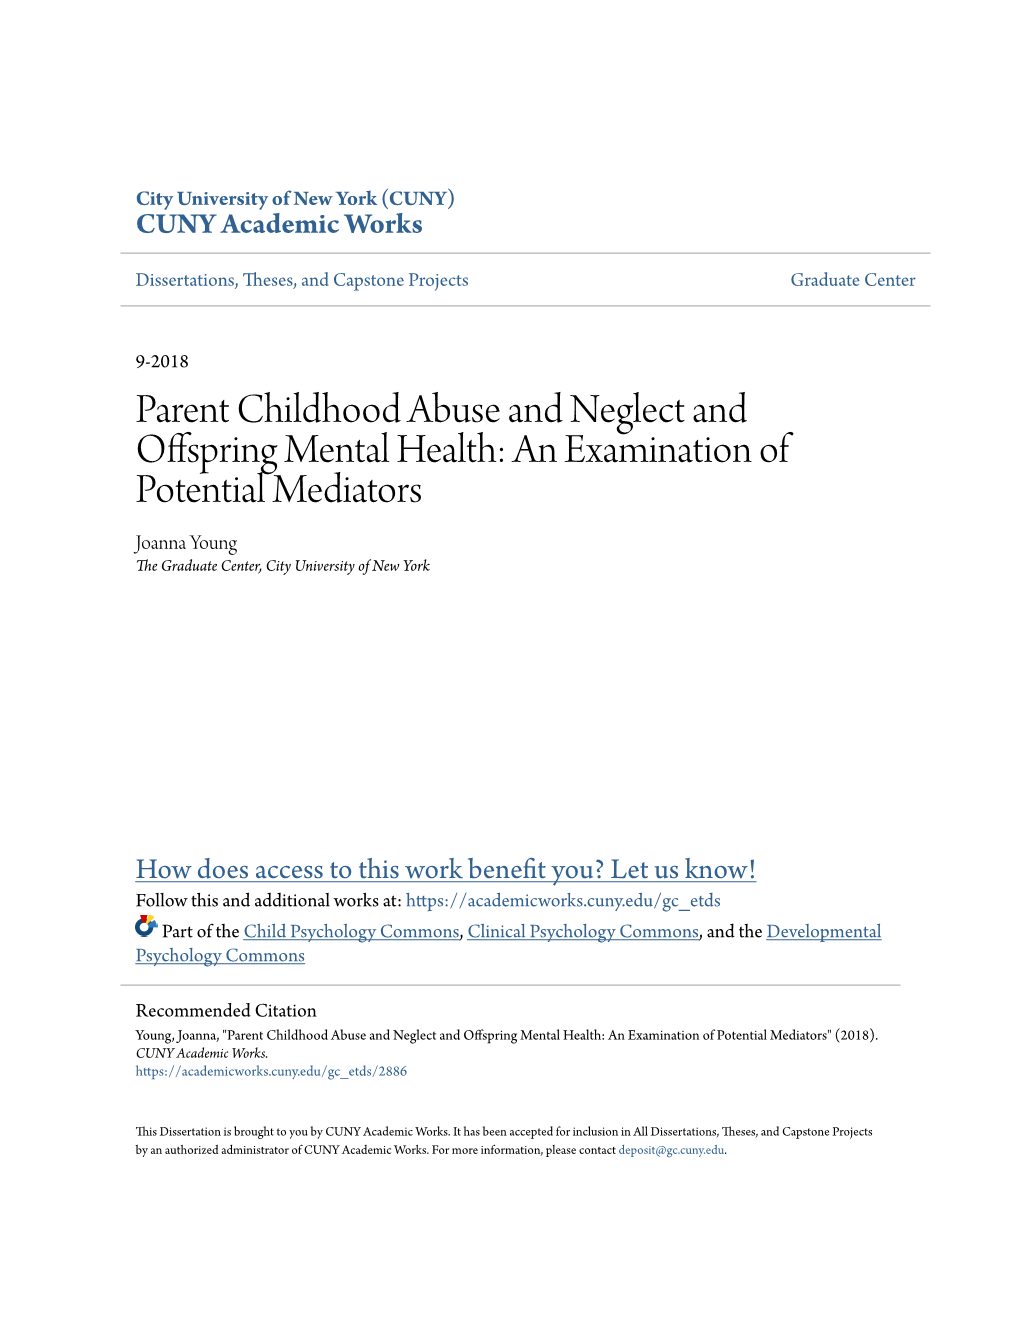 Parent Childhood Abuse and Neglect and Offspring Mental Health: an Examination of Potential Mediators Joanna Young the Graduate Center, City University of New York